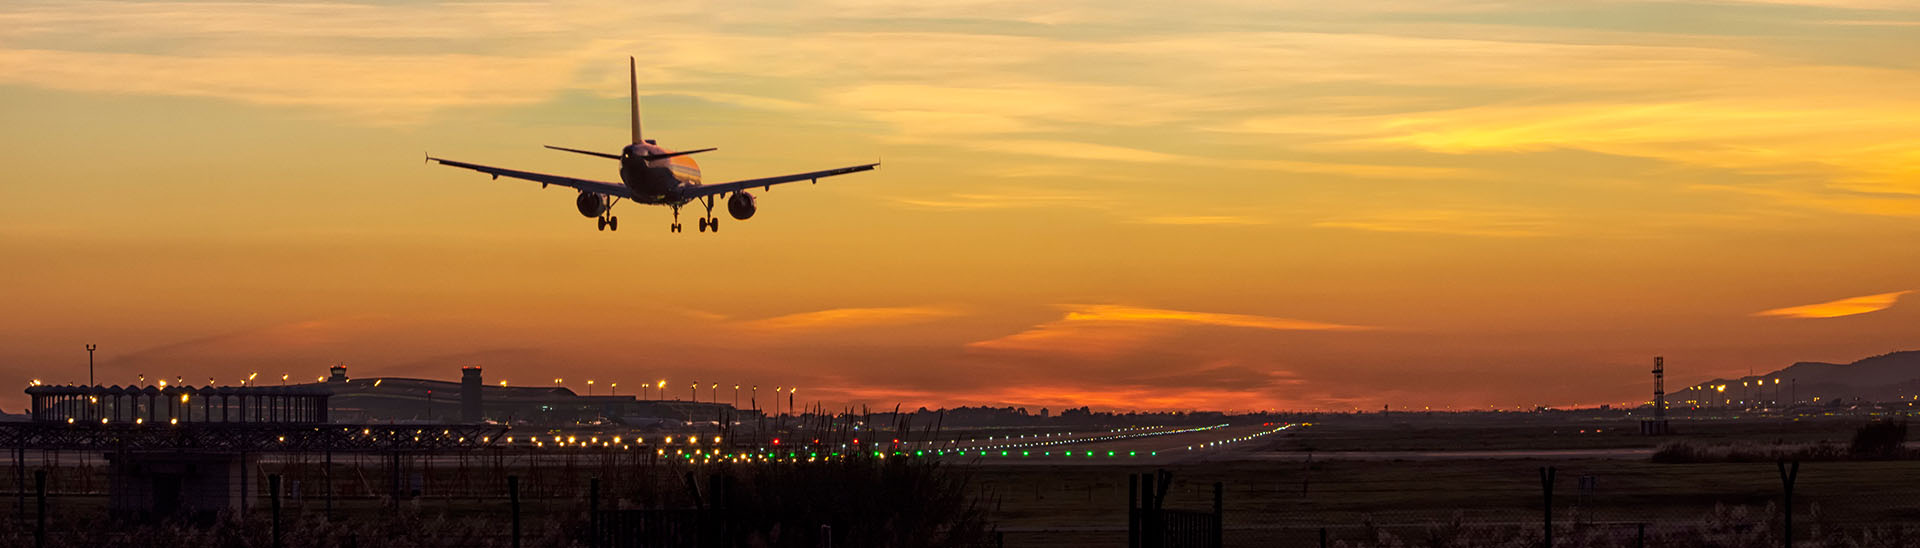 A Complete Guide to Know Before You Fly on Red Eye Flights